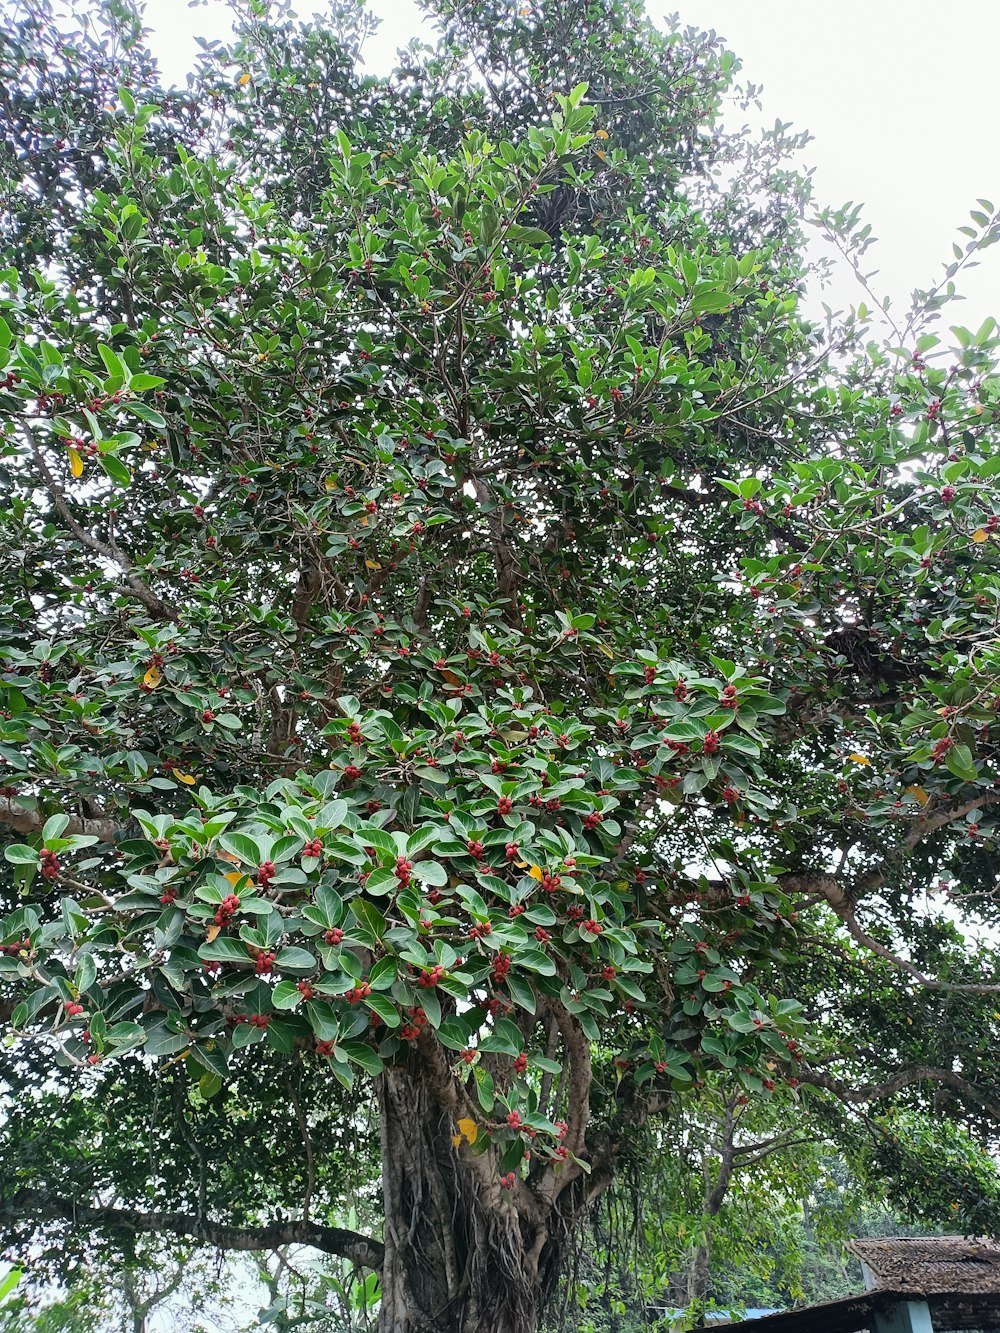 a large tree with lots of red berries growing on it